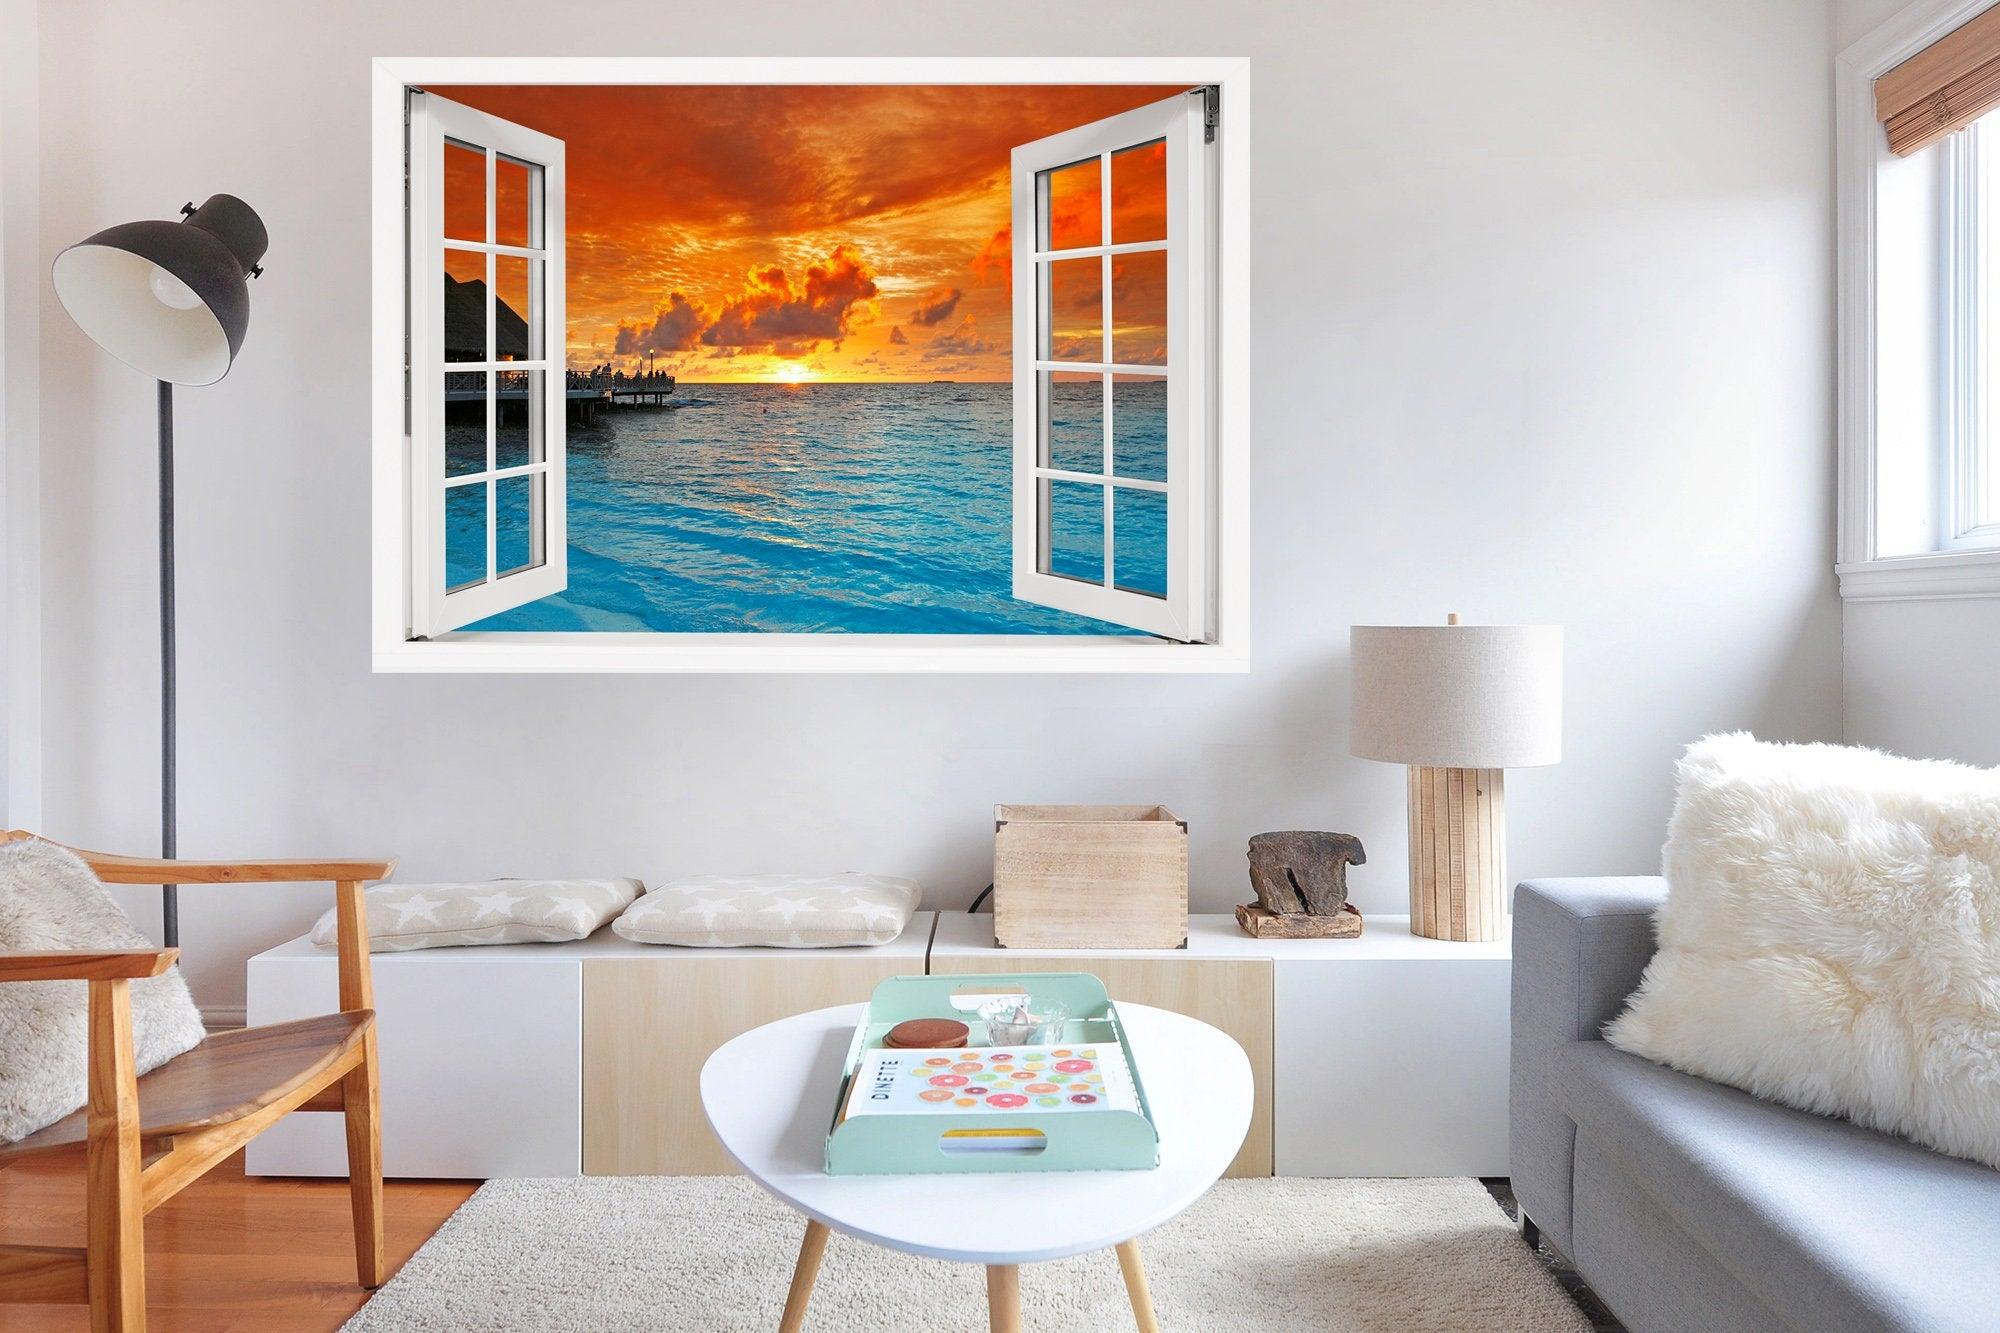 Window Scape Sunset over Pier #24, Window Decal, Sticker Sunset, Removable, Fabric, Window Frame, Office,Bedroom, 3D